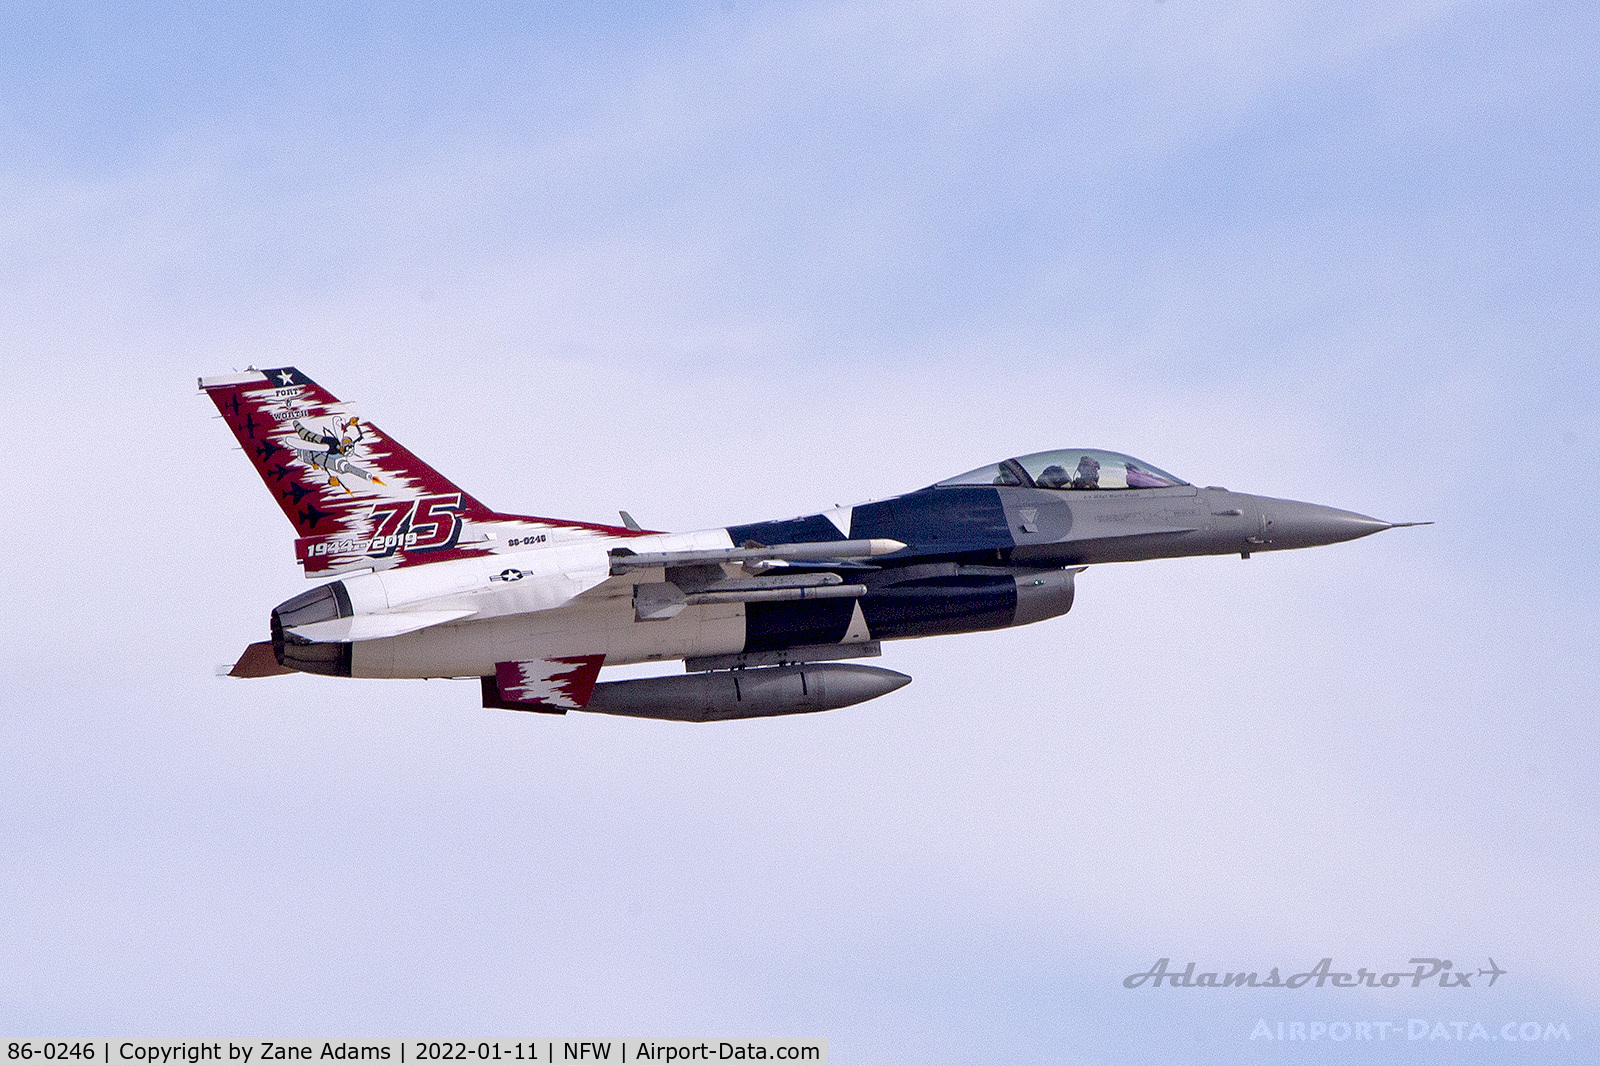 86-0246, 1986 General Dynamics F-16C Fighting Falcon C/N 5C-352, 457th Fighter Squadron 7th anniversary paint